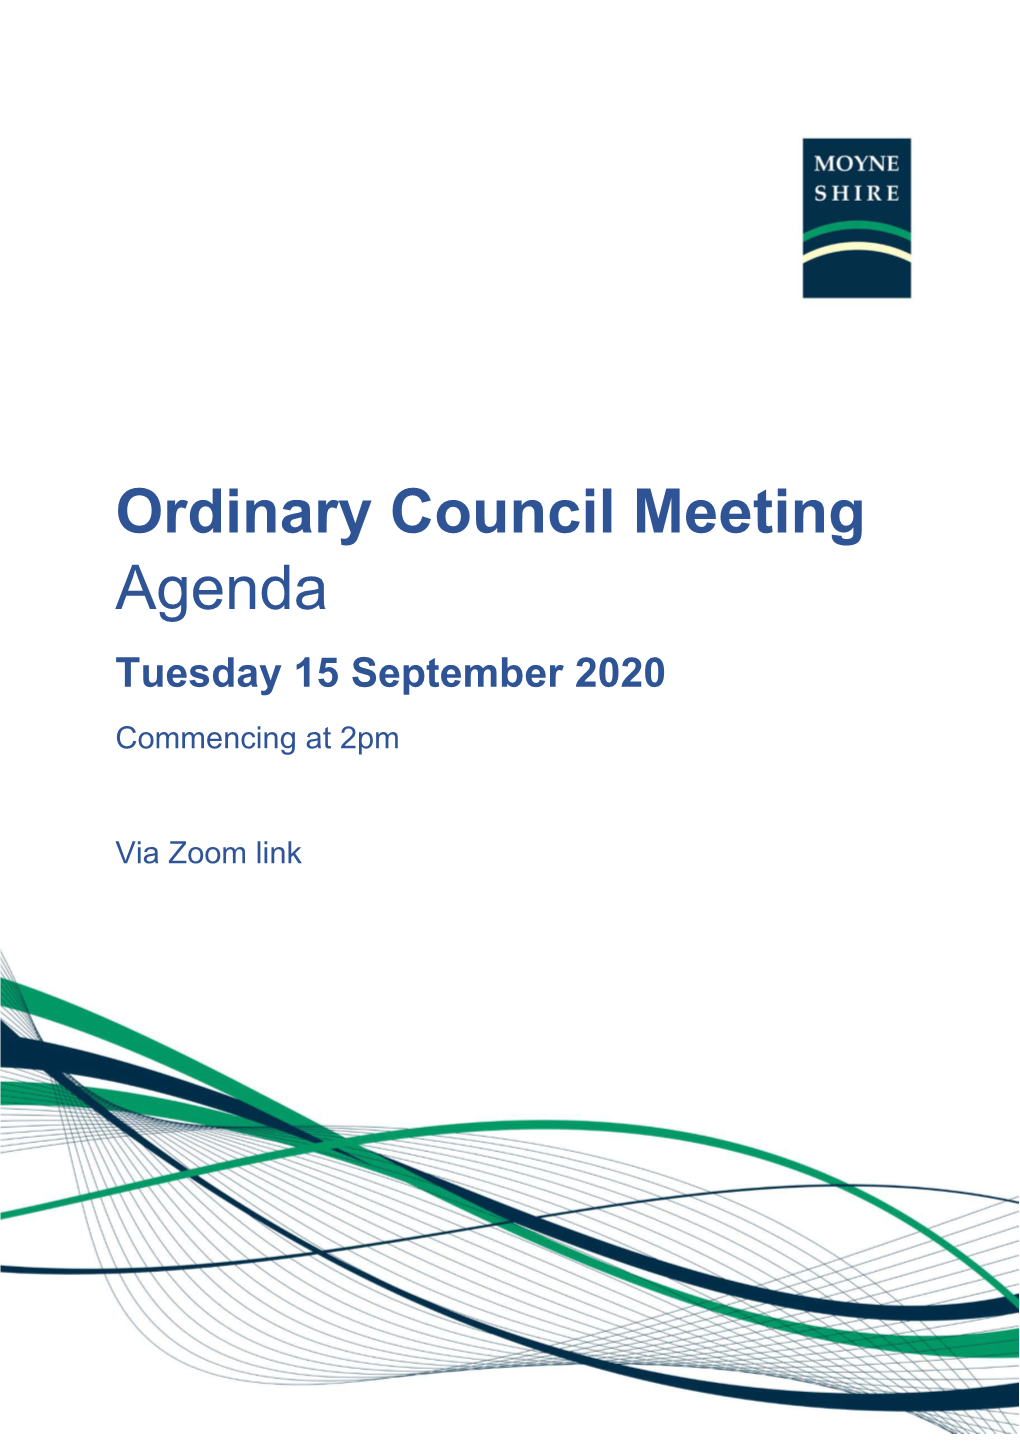 Ordinary Council Meeting Agenda Tuesday 15 September 2020 Commencing at 2Pm